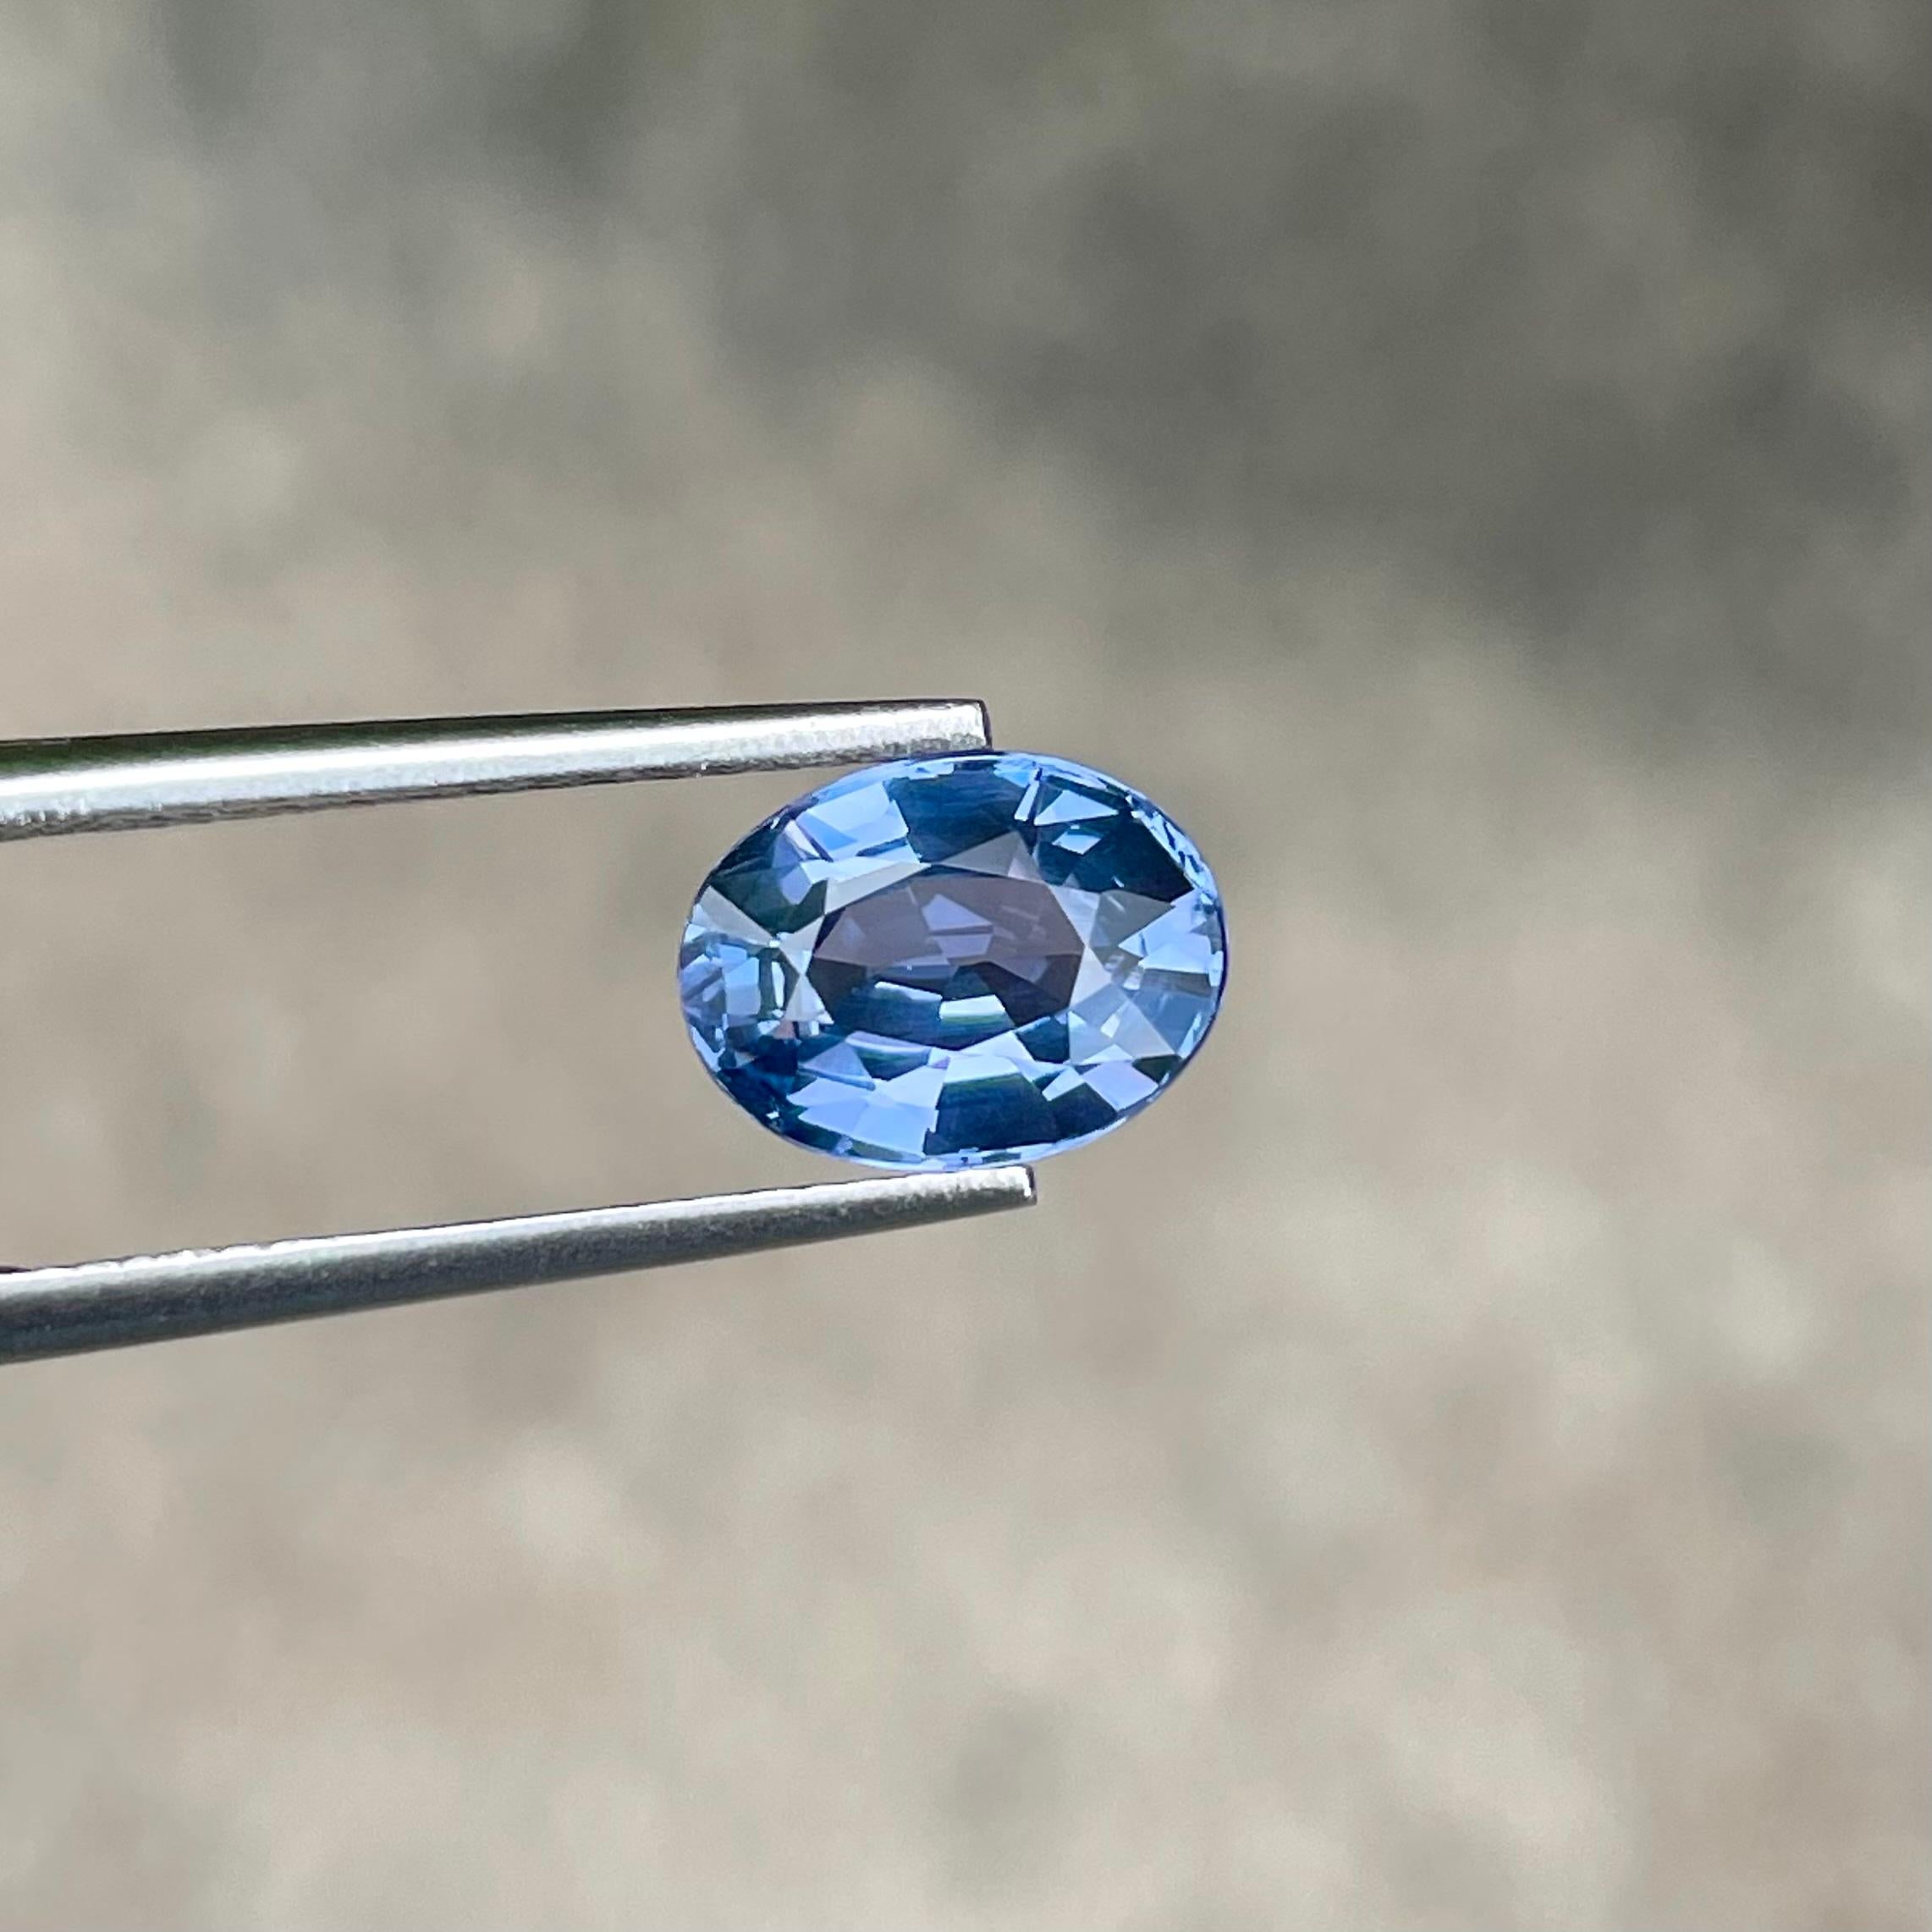 Weight : 2.45 carats 
Dimensions : 9.2x7.0x4.8 mm
Clarity : Eye Clea 
Treatment : None
Origin : Sri Lanka
Cut : Oval
Shape : Step Oval




Indulge in the captivating allure of this Bright Blue Burmese Loose Spinel, a true testament to nature's